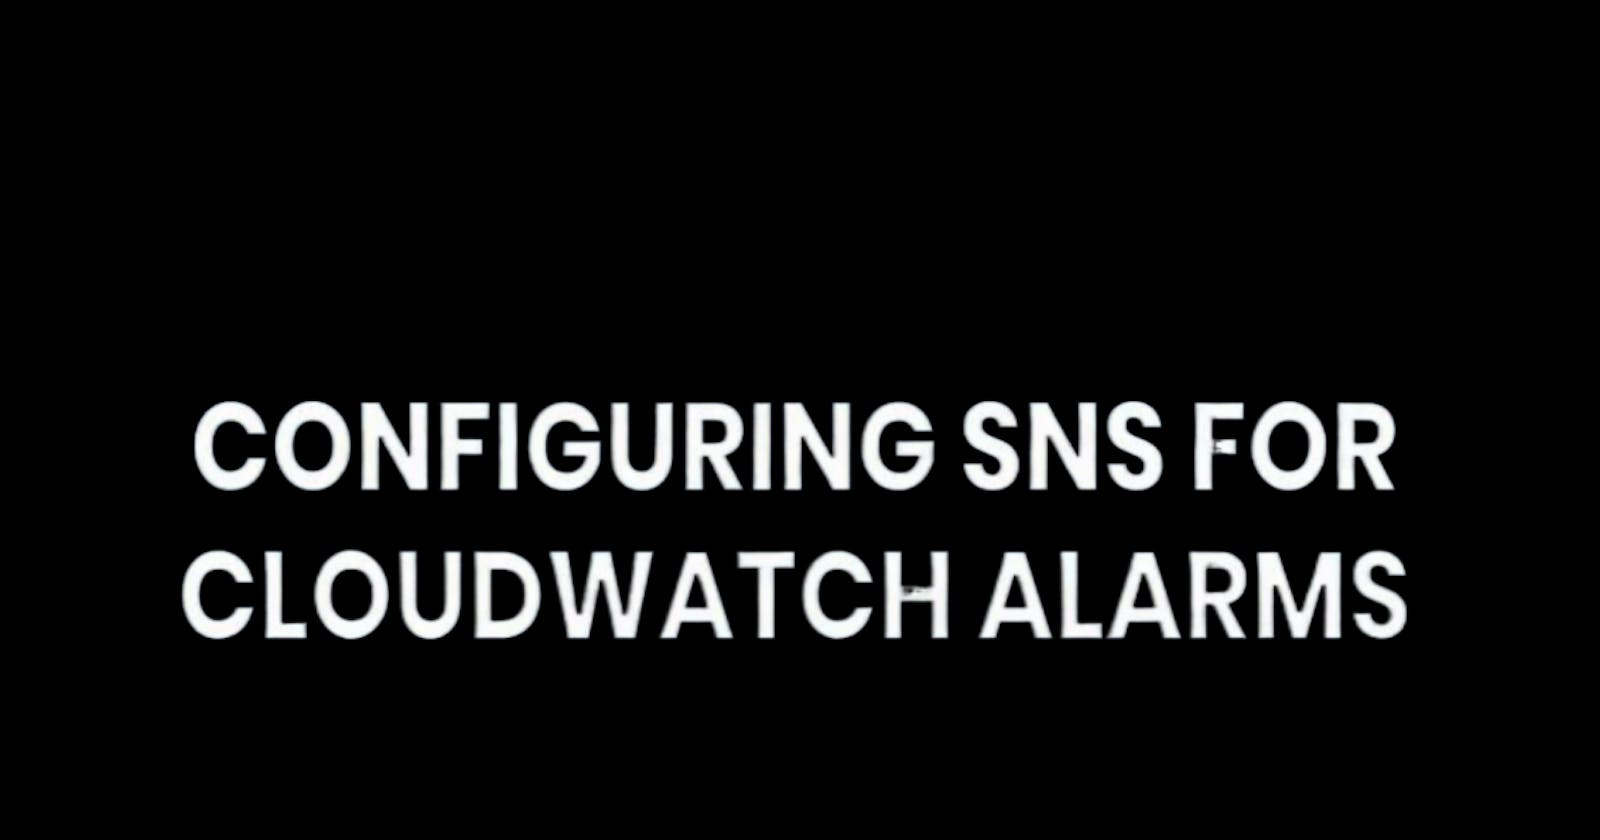 Day 46 - Set up CloudWatch alarms and SNS topic in AWS